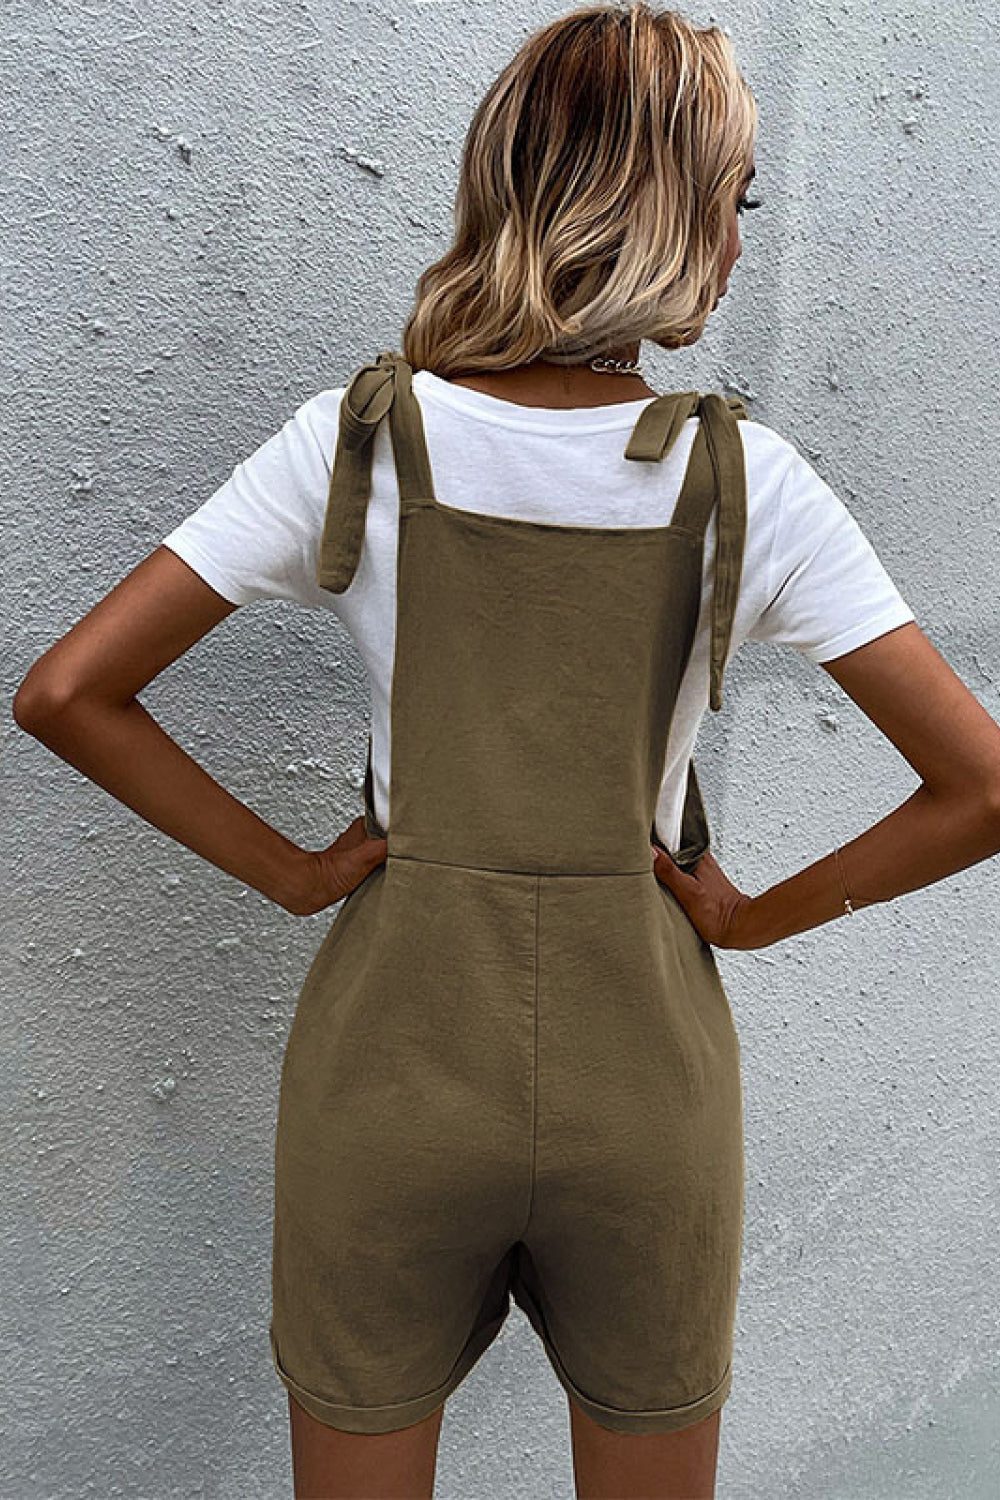 Tie Cuffed Short Overalls with Pockets Tie Cuffed Short Overalls with Pockets - M&R CORNER Trendsi